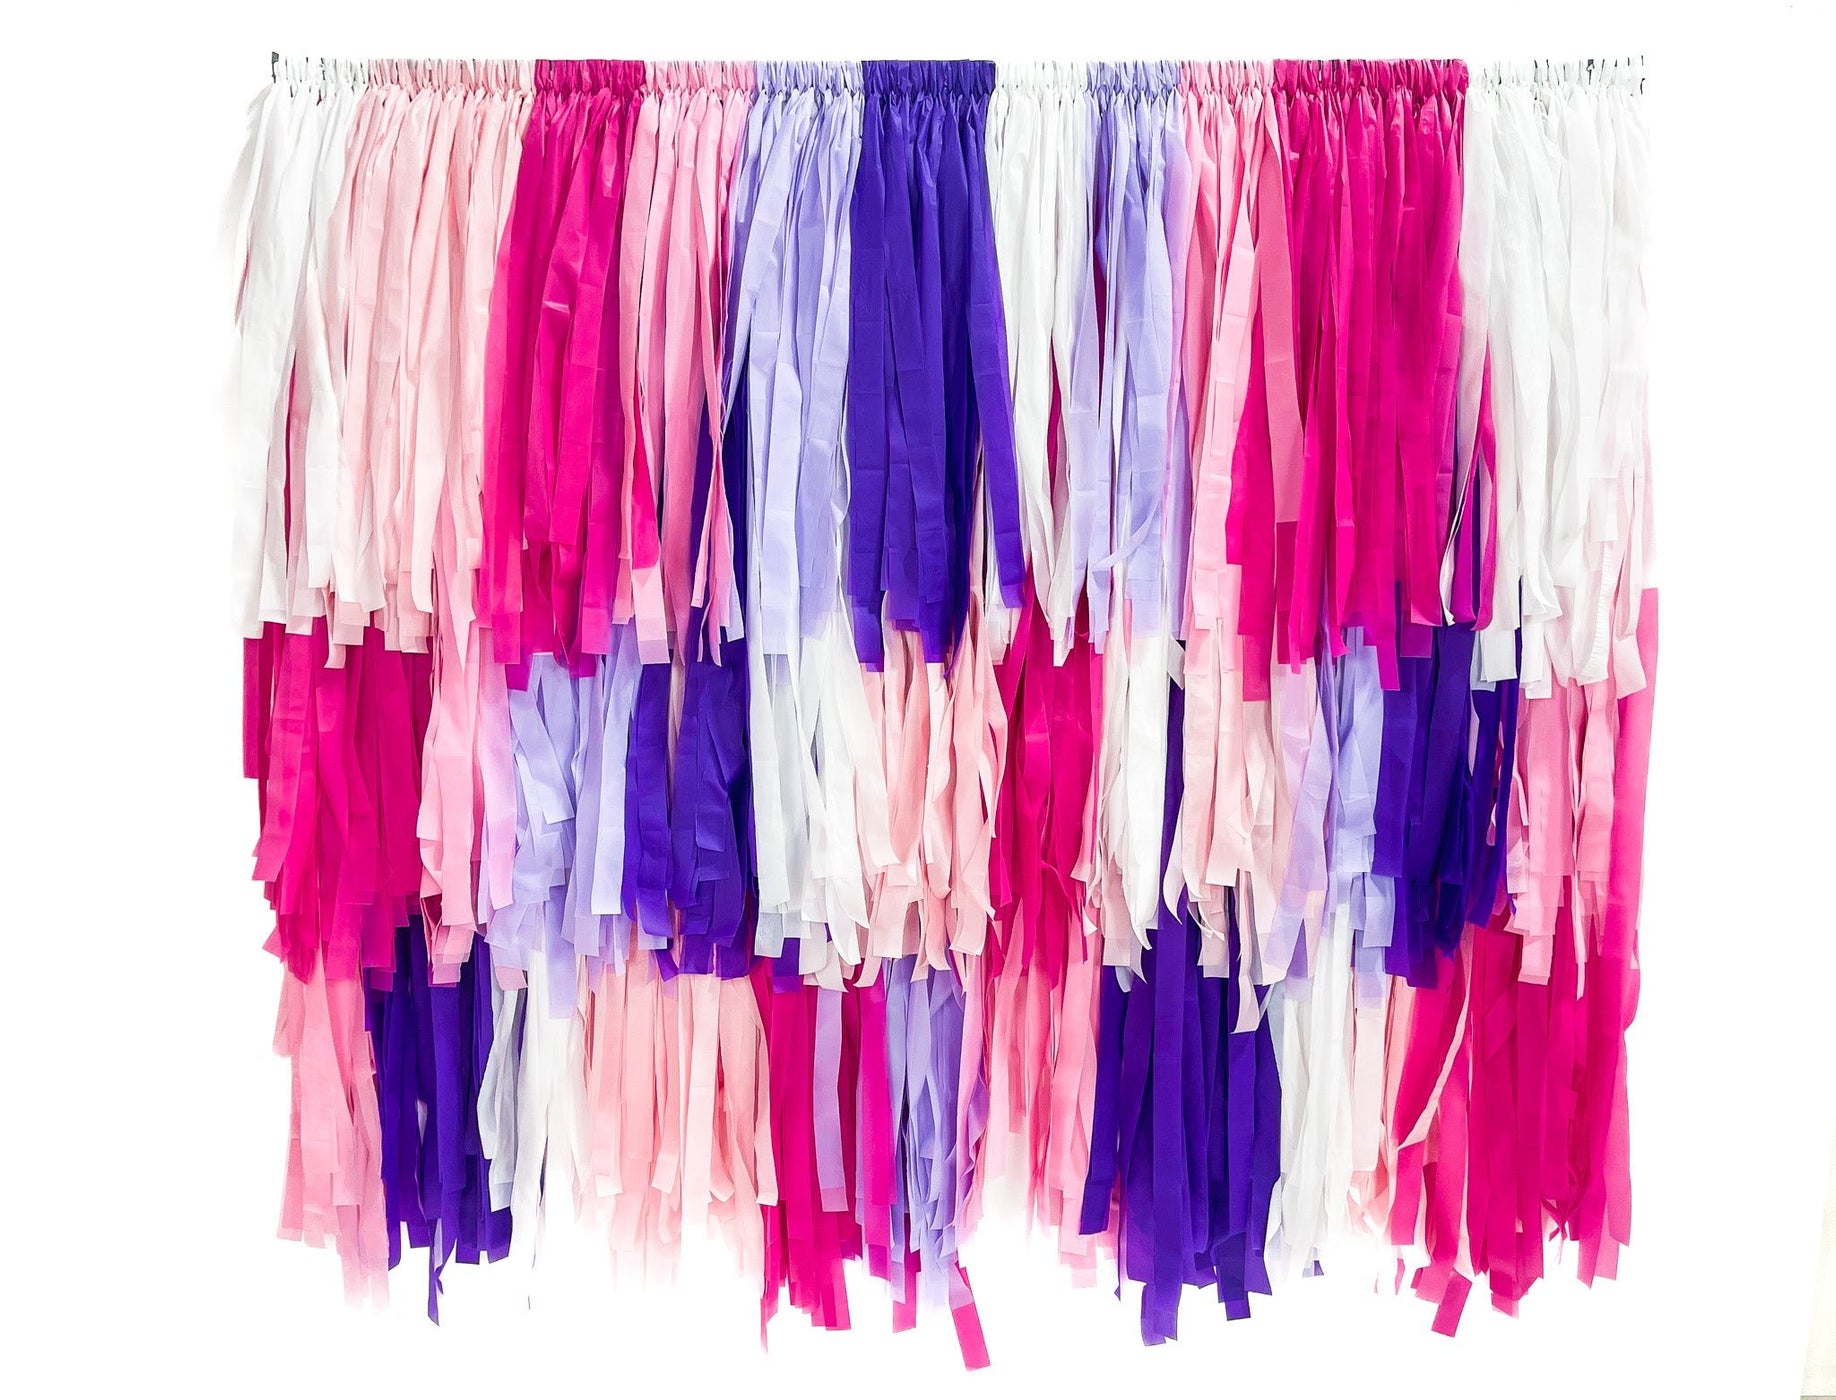 Dance Party Fringe Backdrop - Oh My Darling Party Co-dancedefaultPINK BACKDROP #Fringe_Backdrop#